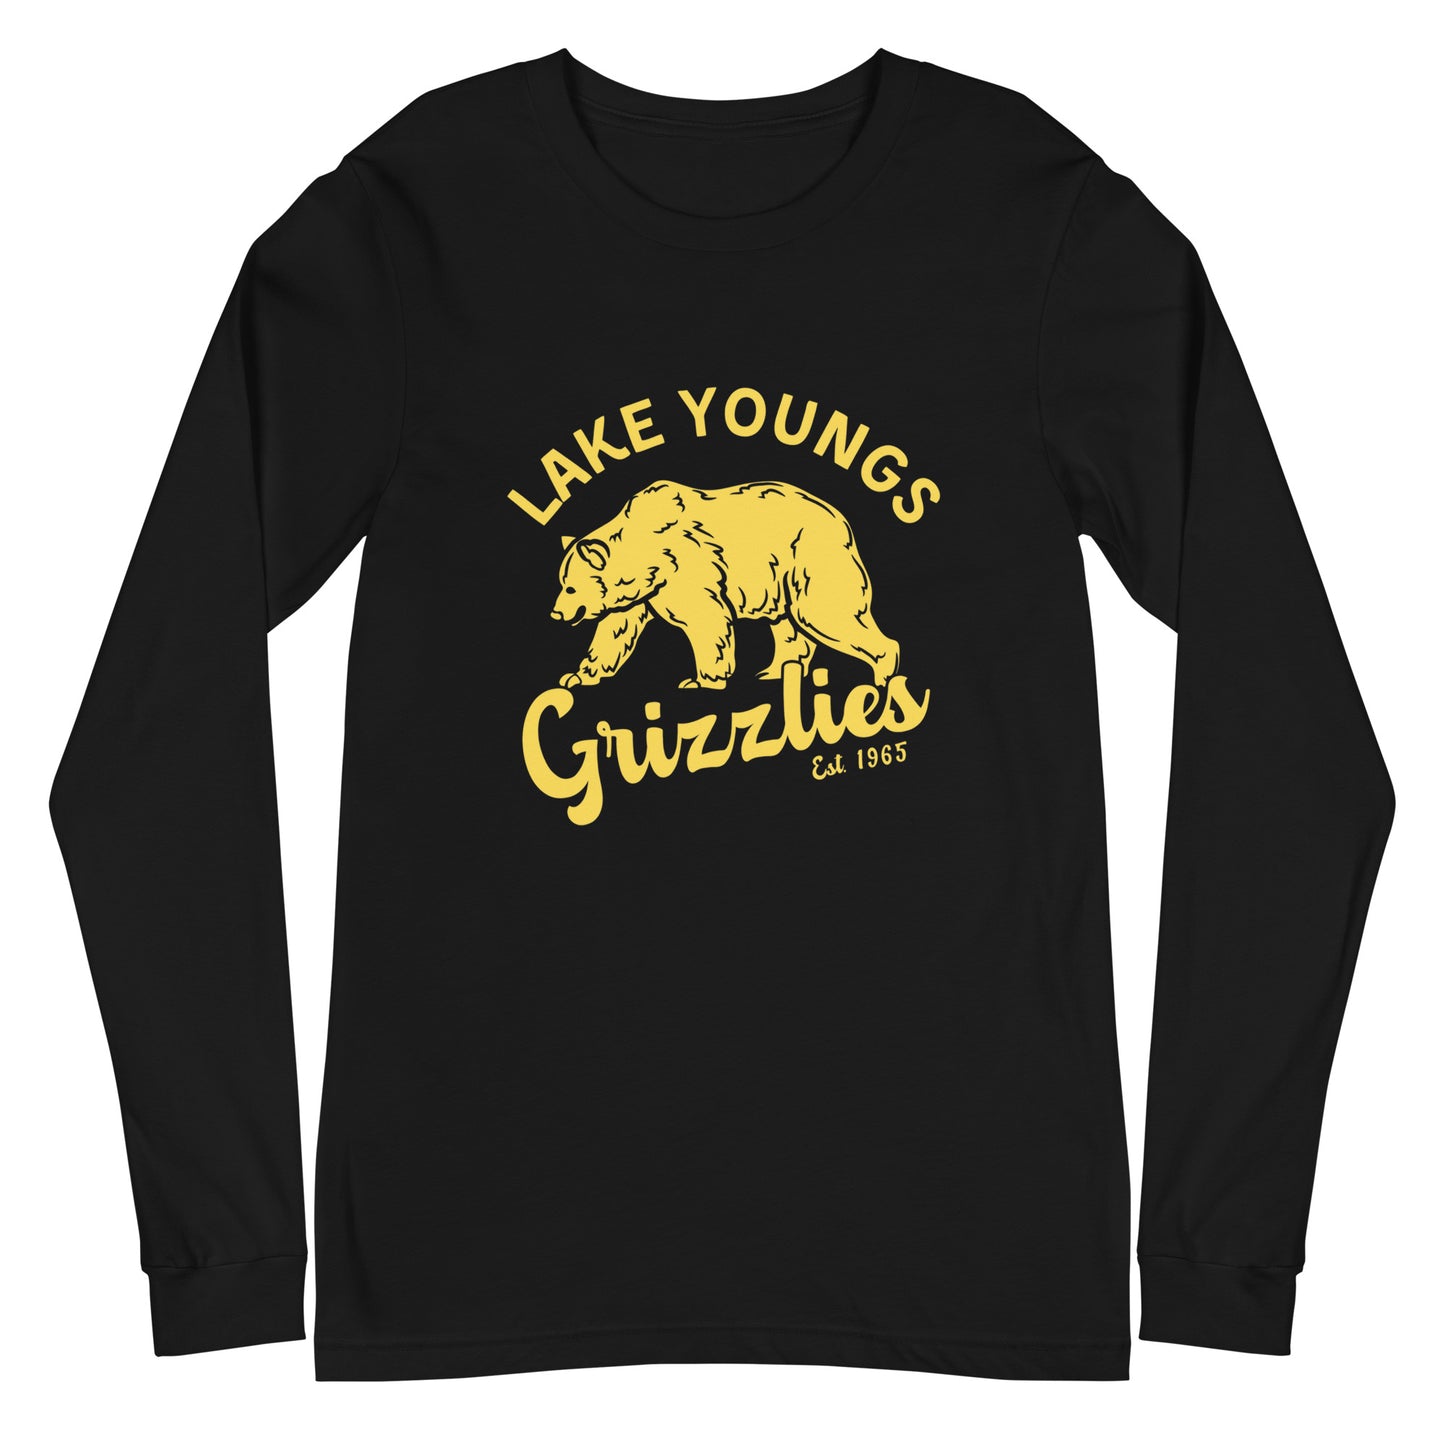 Yellow “Retro Lake Youngs” Adult Long Sleeve T-Shirt